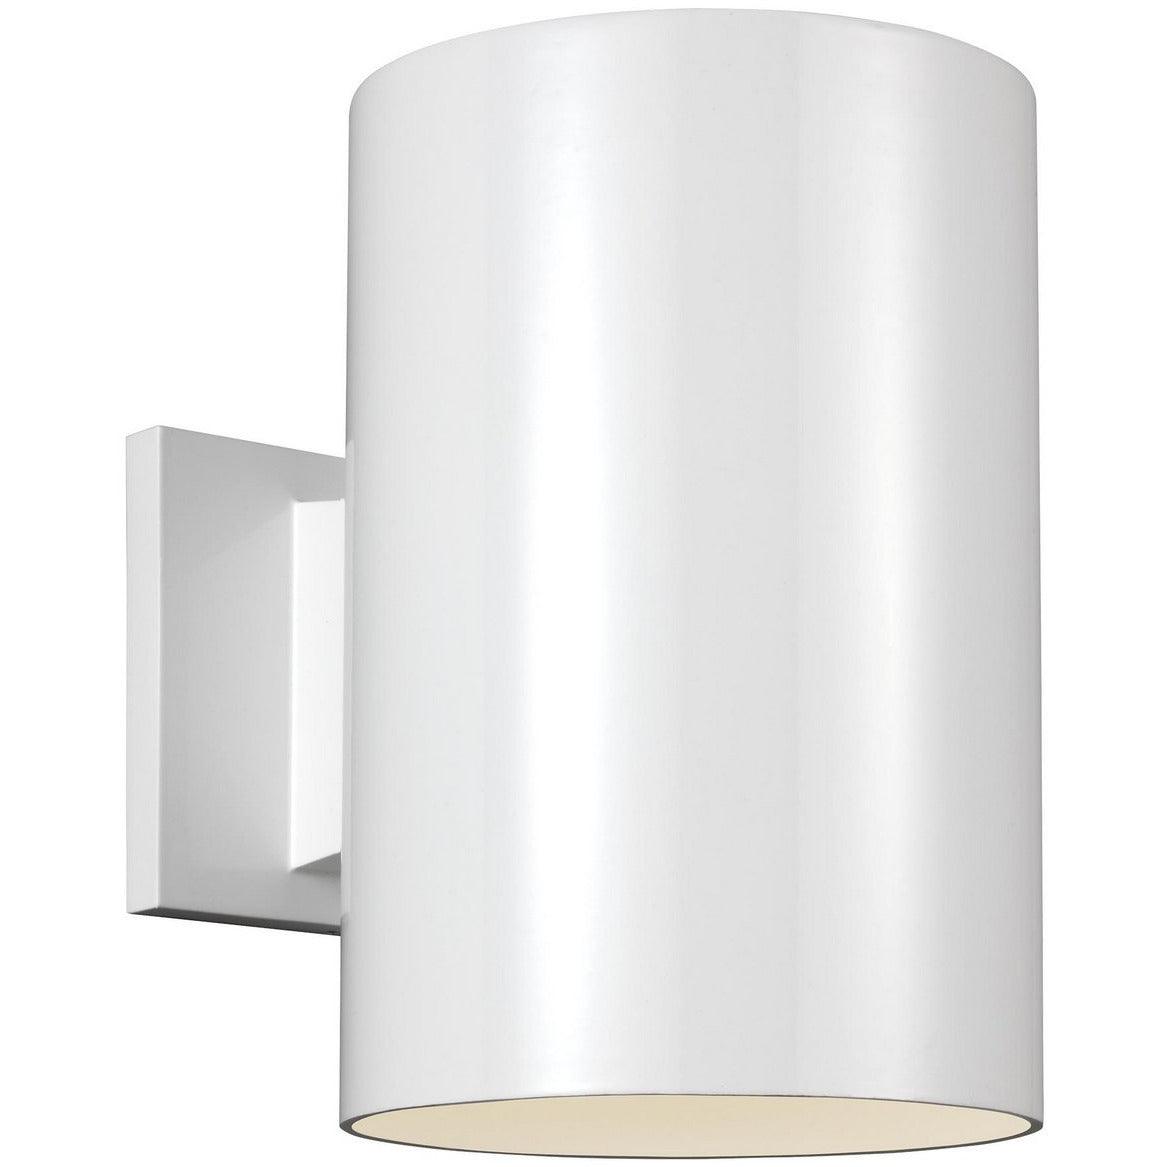 Generation Lighting - Outdoor Cylinders LED Outdoor Wall Sconce - 8313997S-15 | Montreal Lighting & Hardware